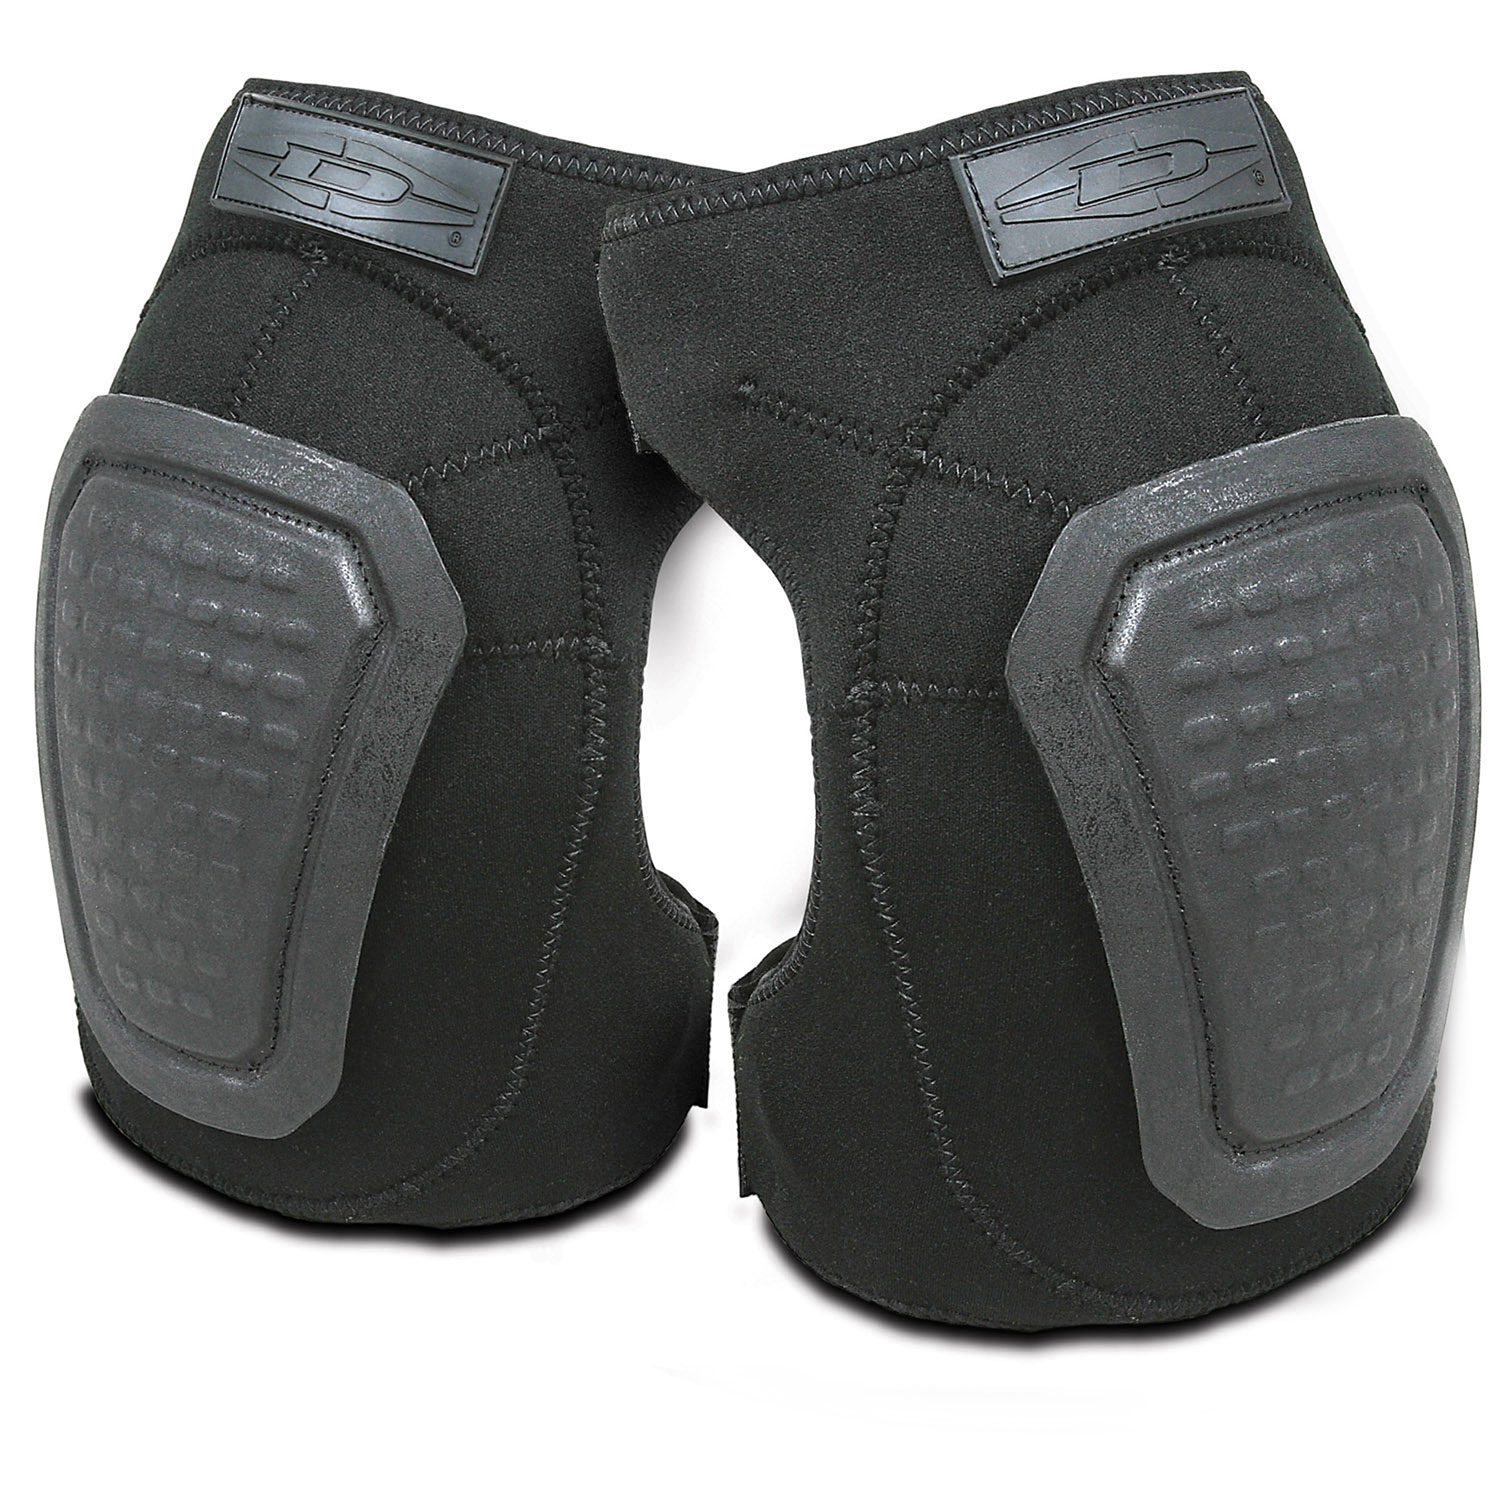 DAMASCUS IMPERIAL NEOPRENE KNEE PADS WITH REINFORCED NON-SLI